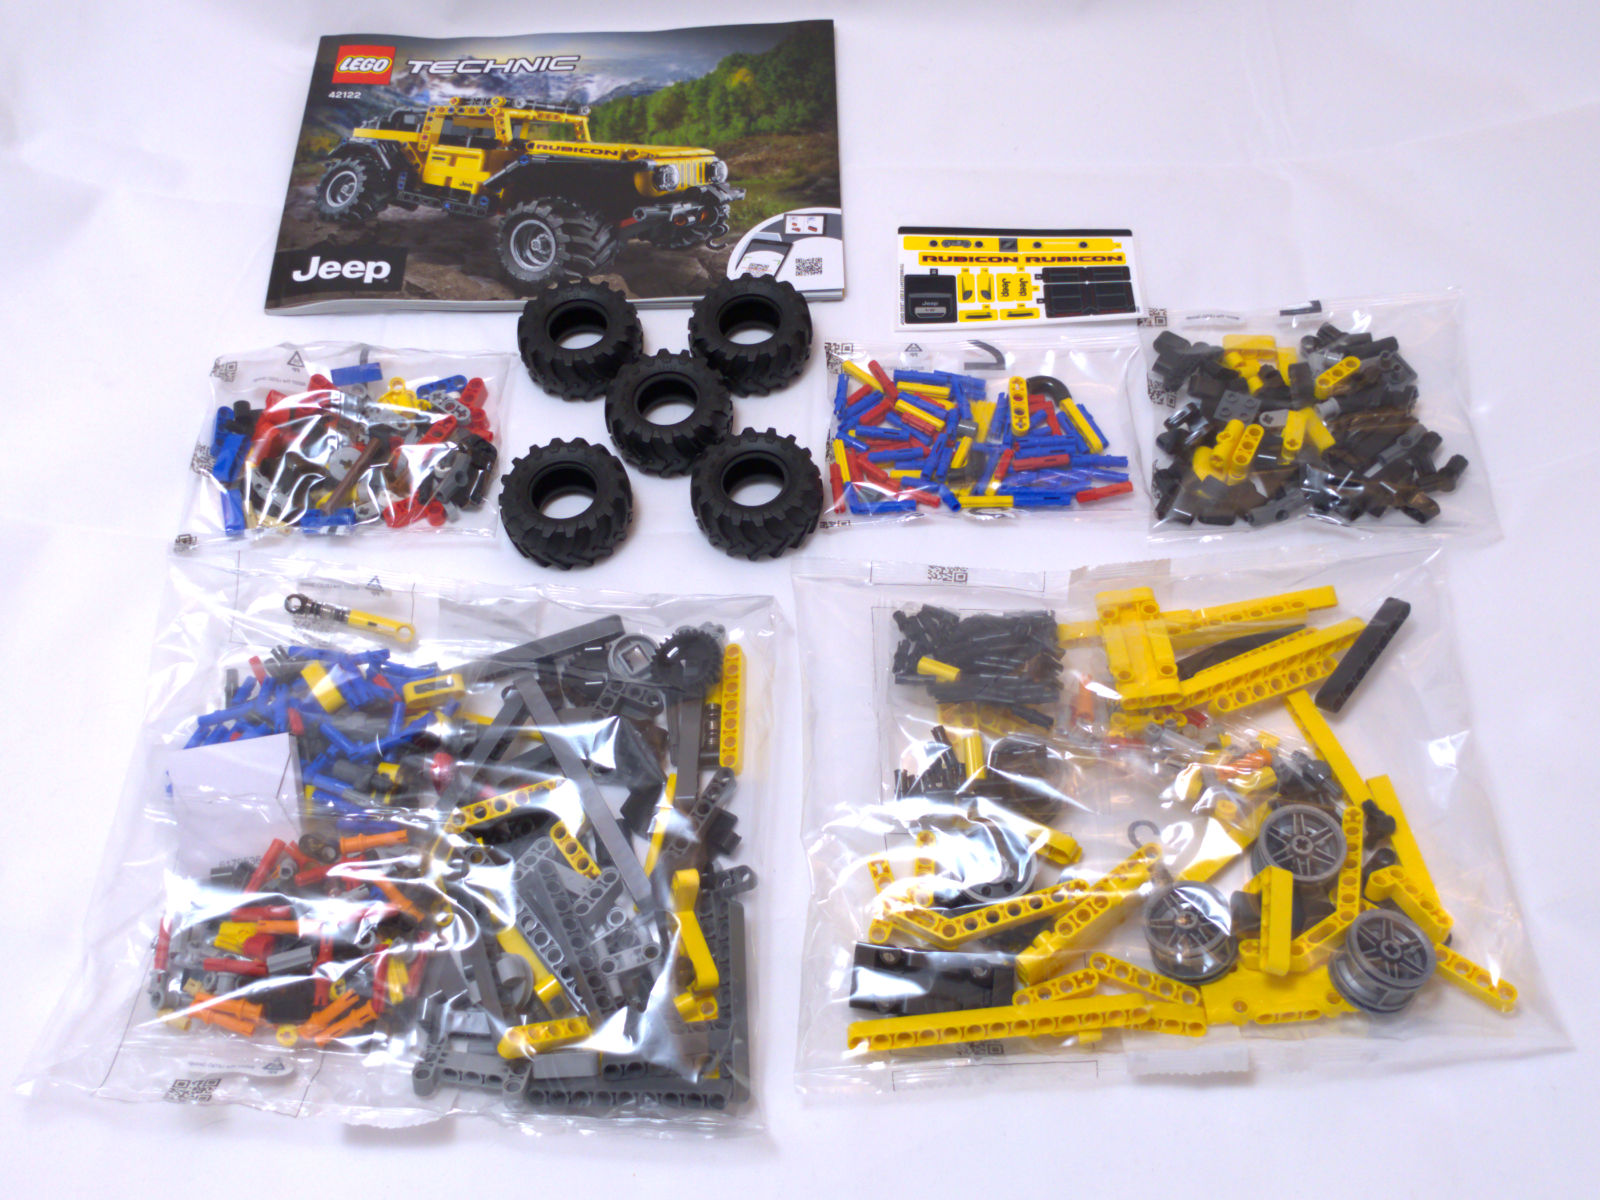 LEGO® Technic review: 42122 Jeep Wrangler | New Elementary: LEGO® parts,  sets and techniques